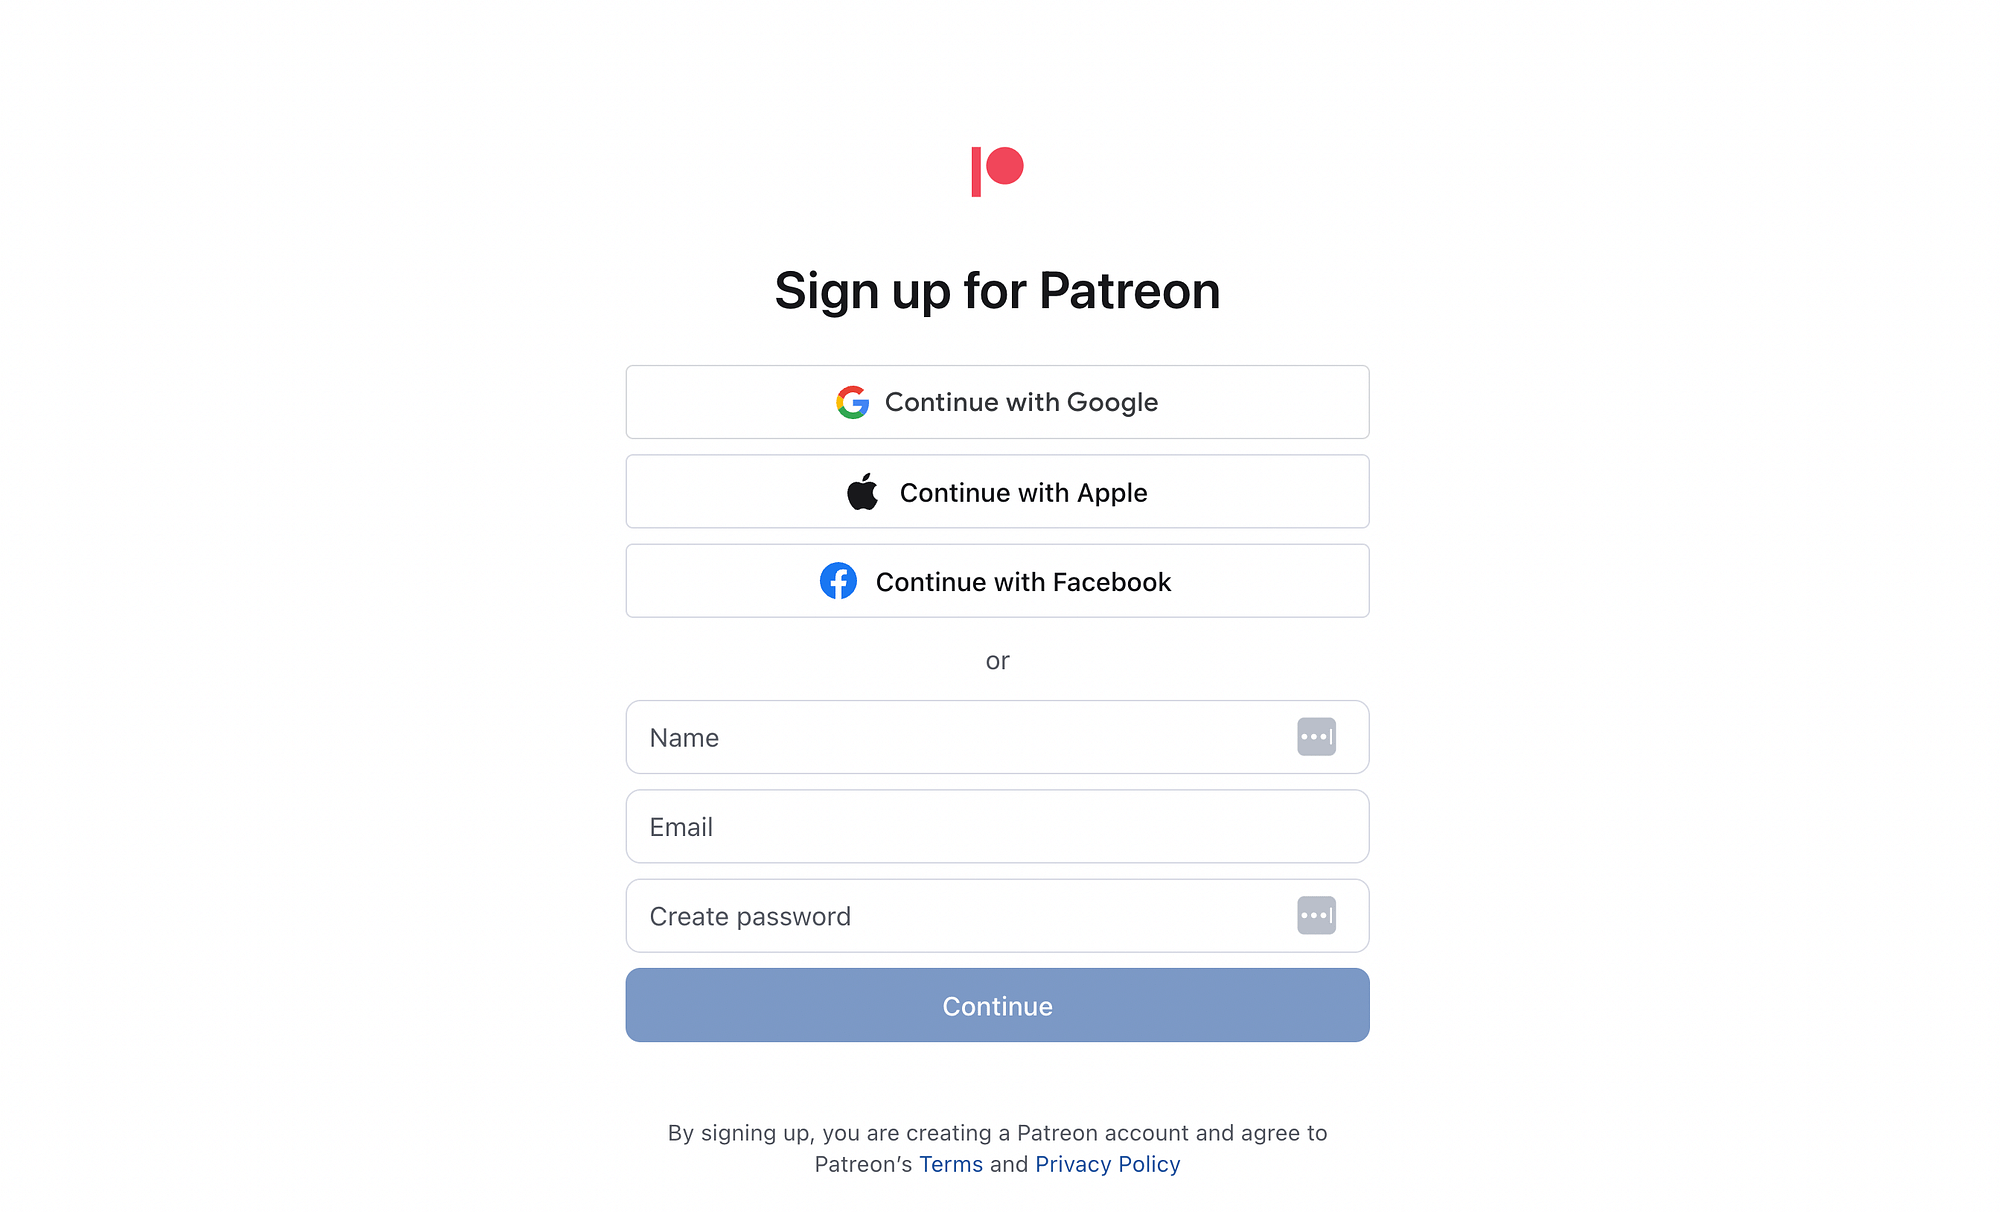 Sign up for Patreon.